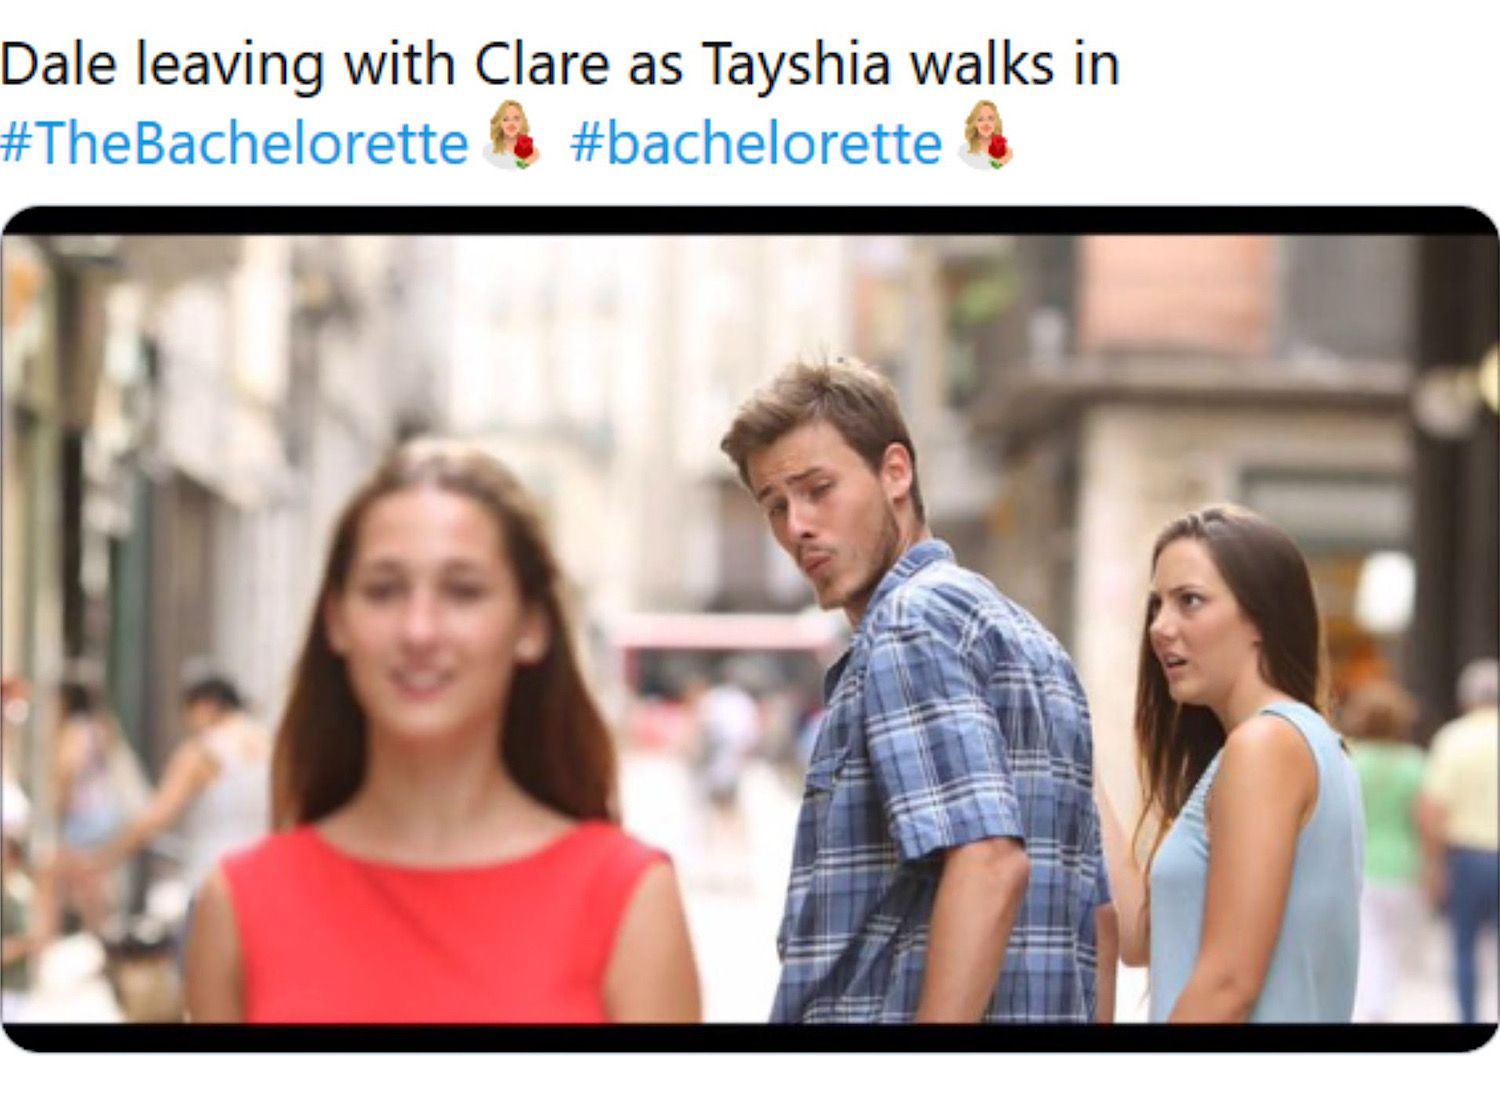 A man with his girlfriend checks out another woman in a a meme about Dale, Clare and Tayshia on The Bachelorette